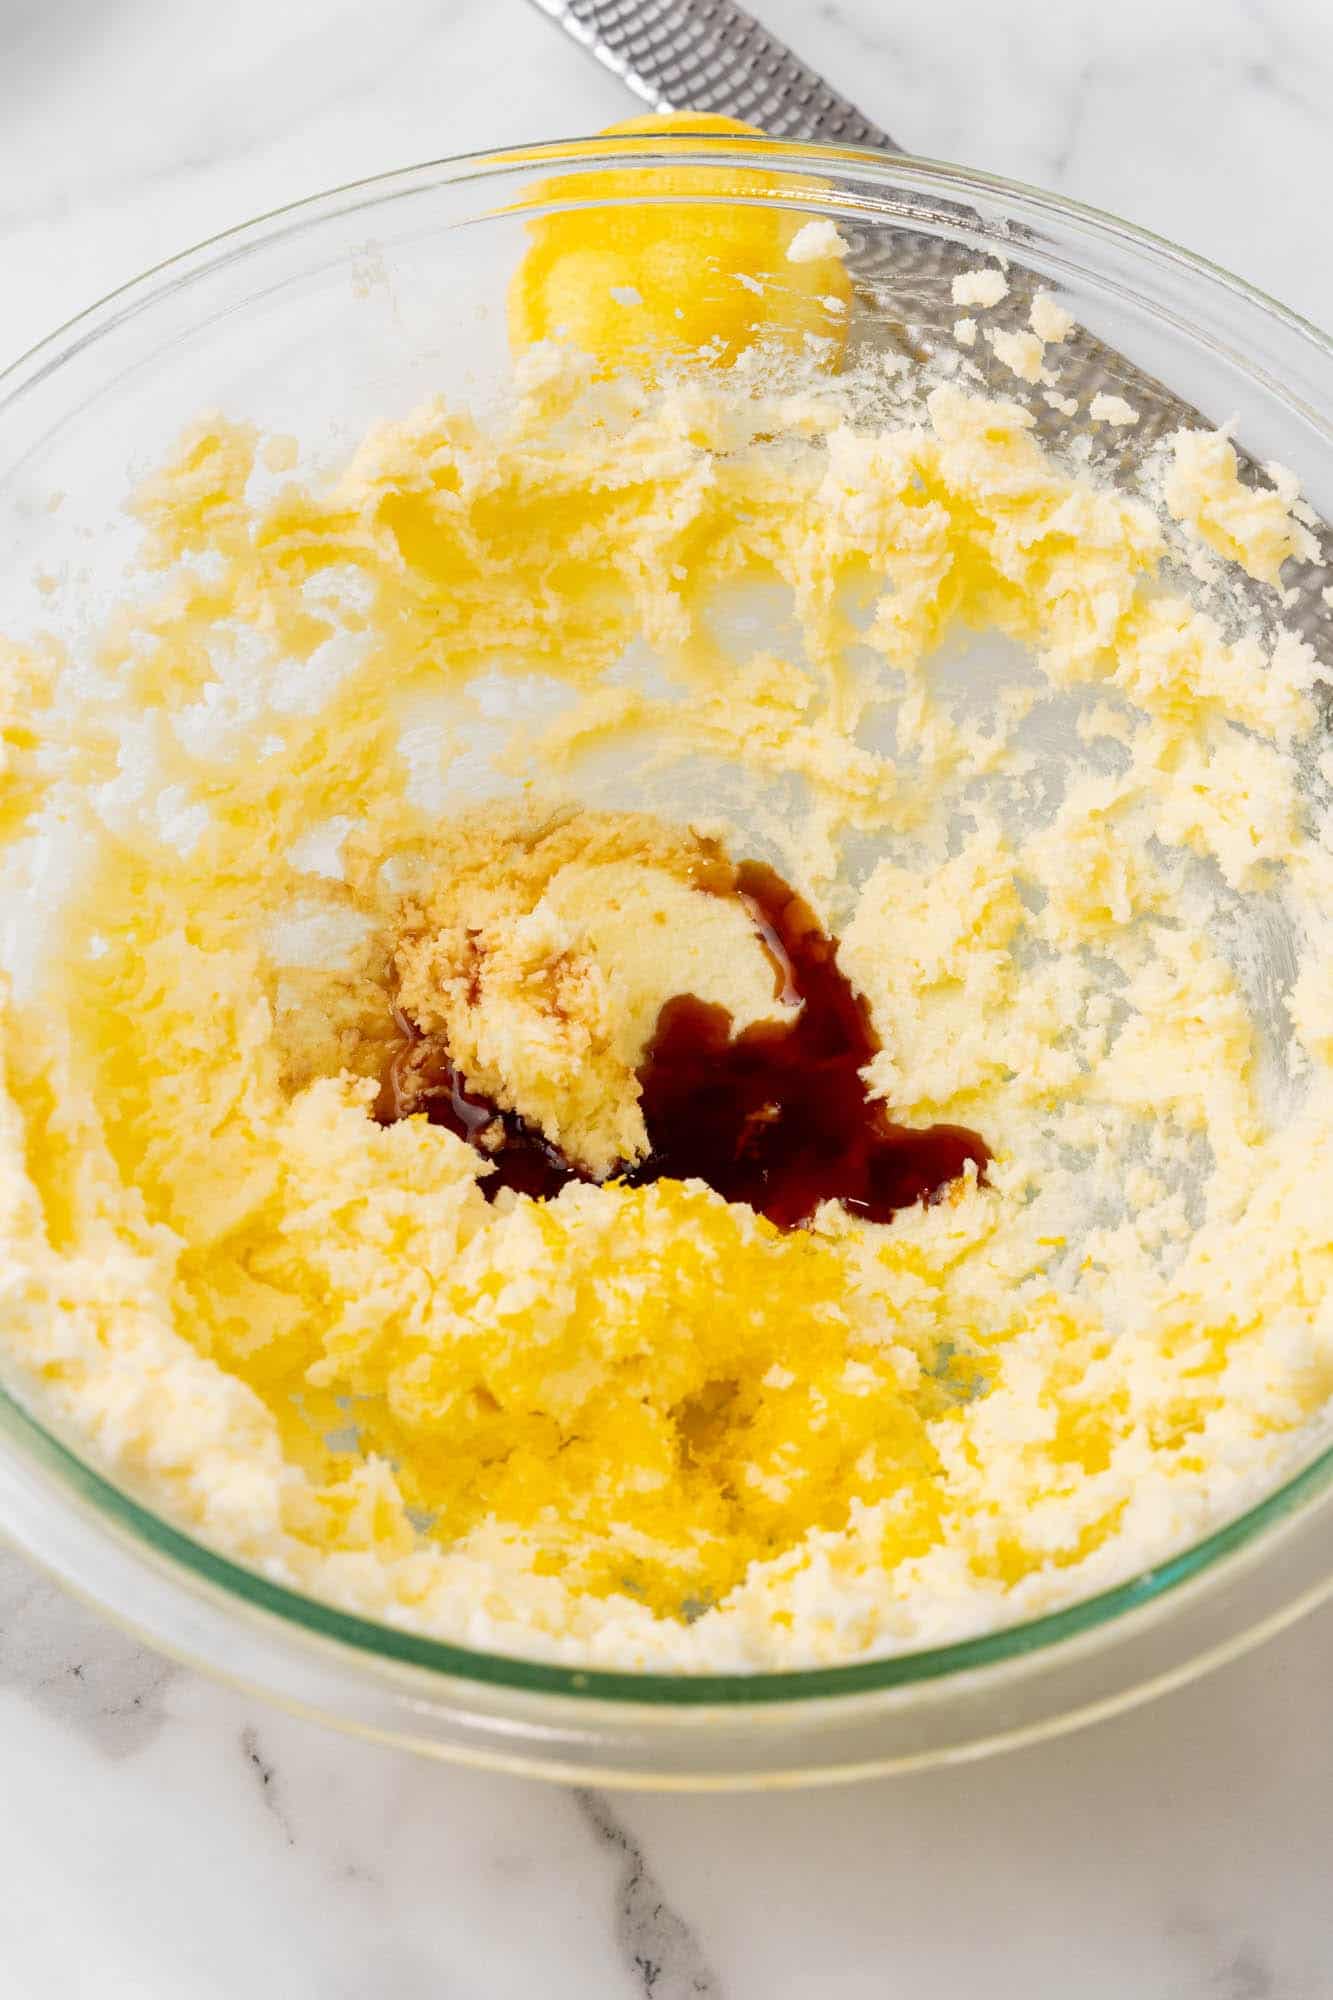 butter and sugar creamed in a bowl. Vanilla has been added.